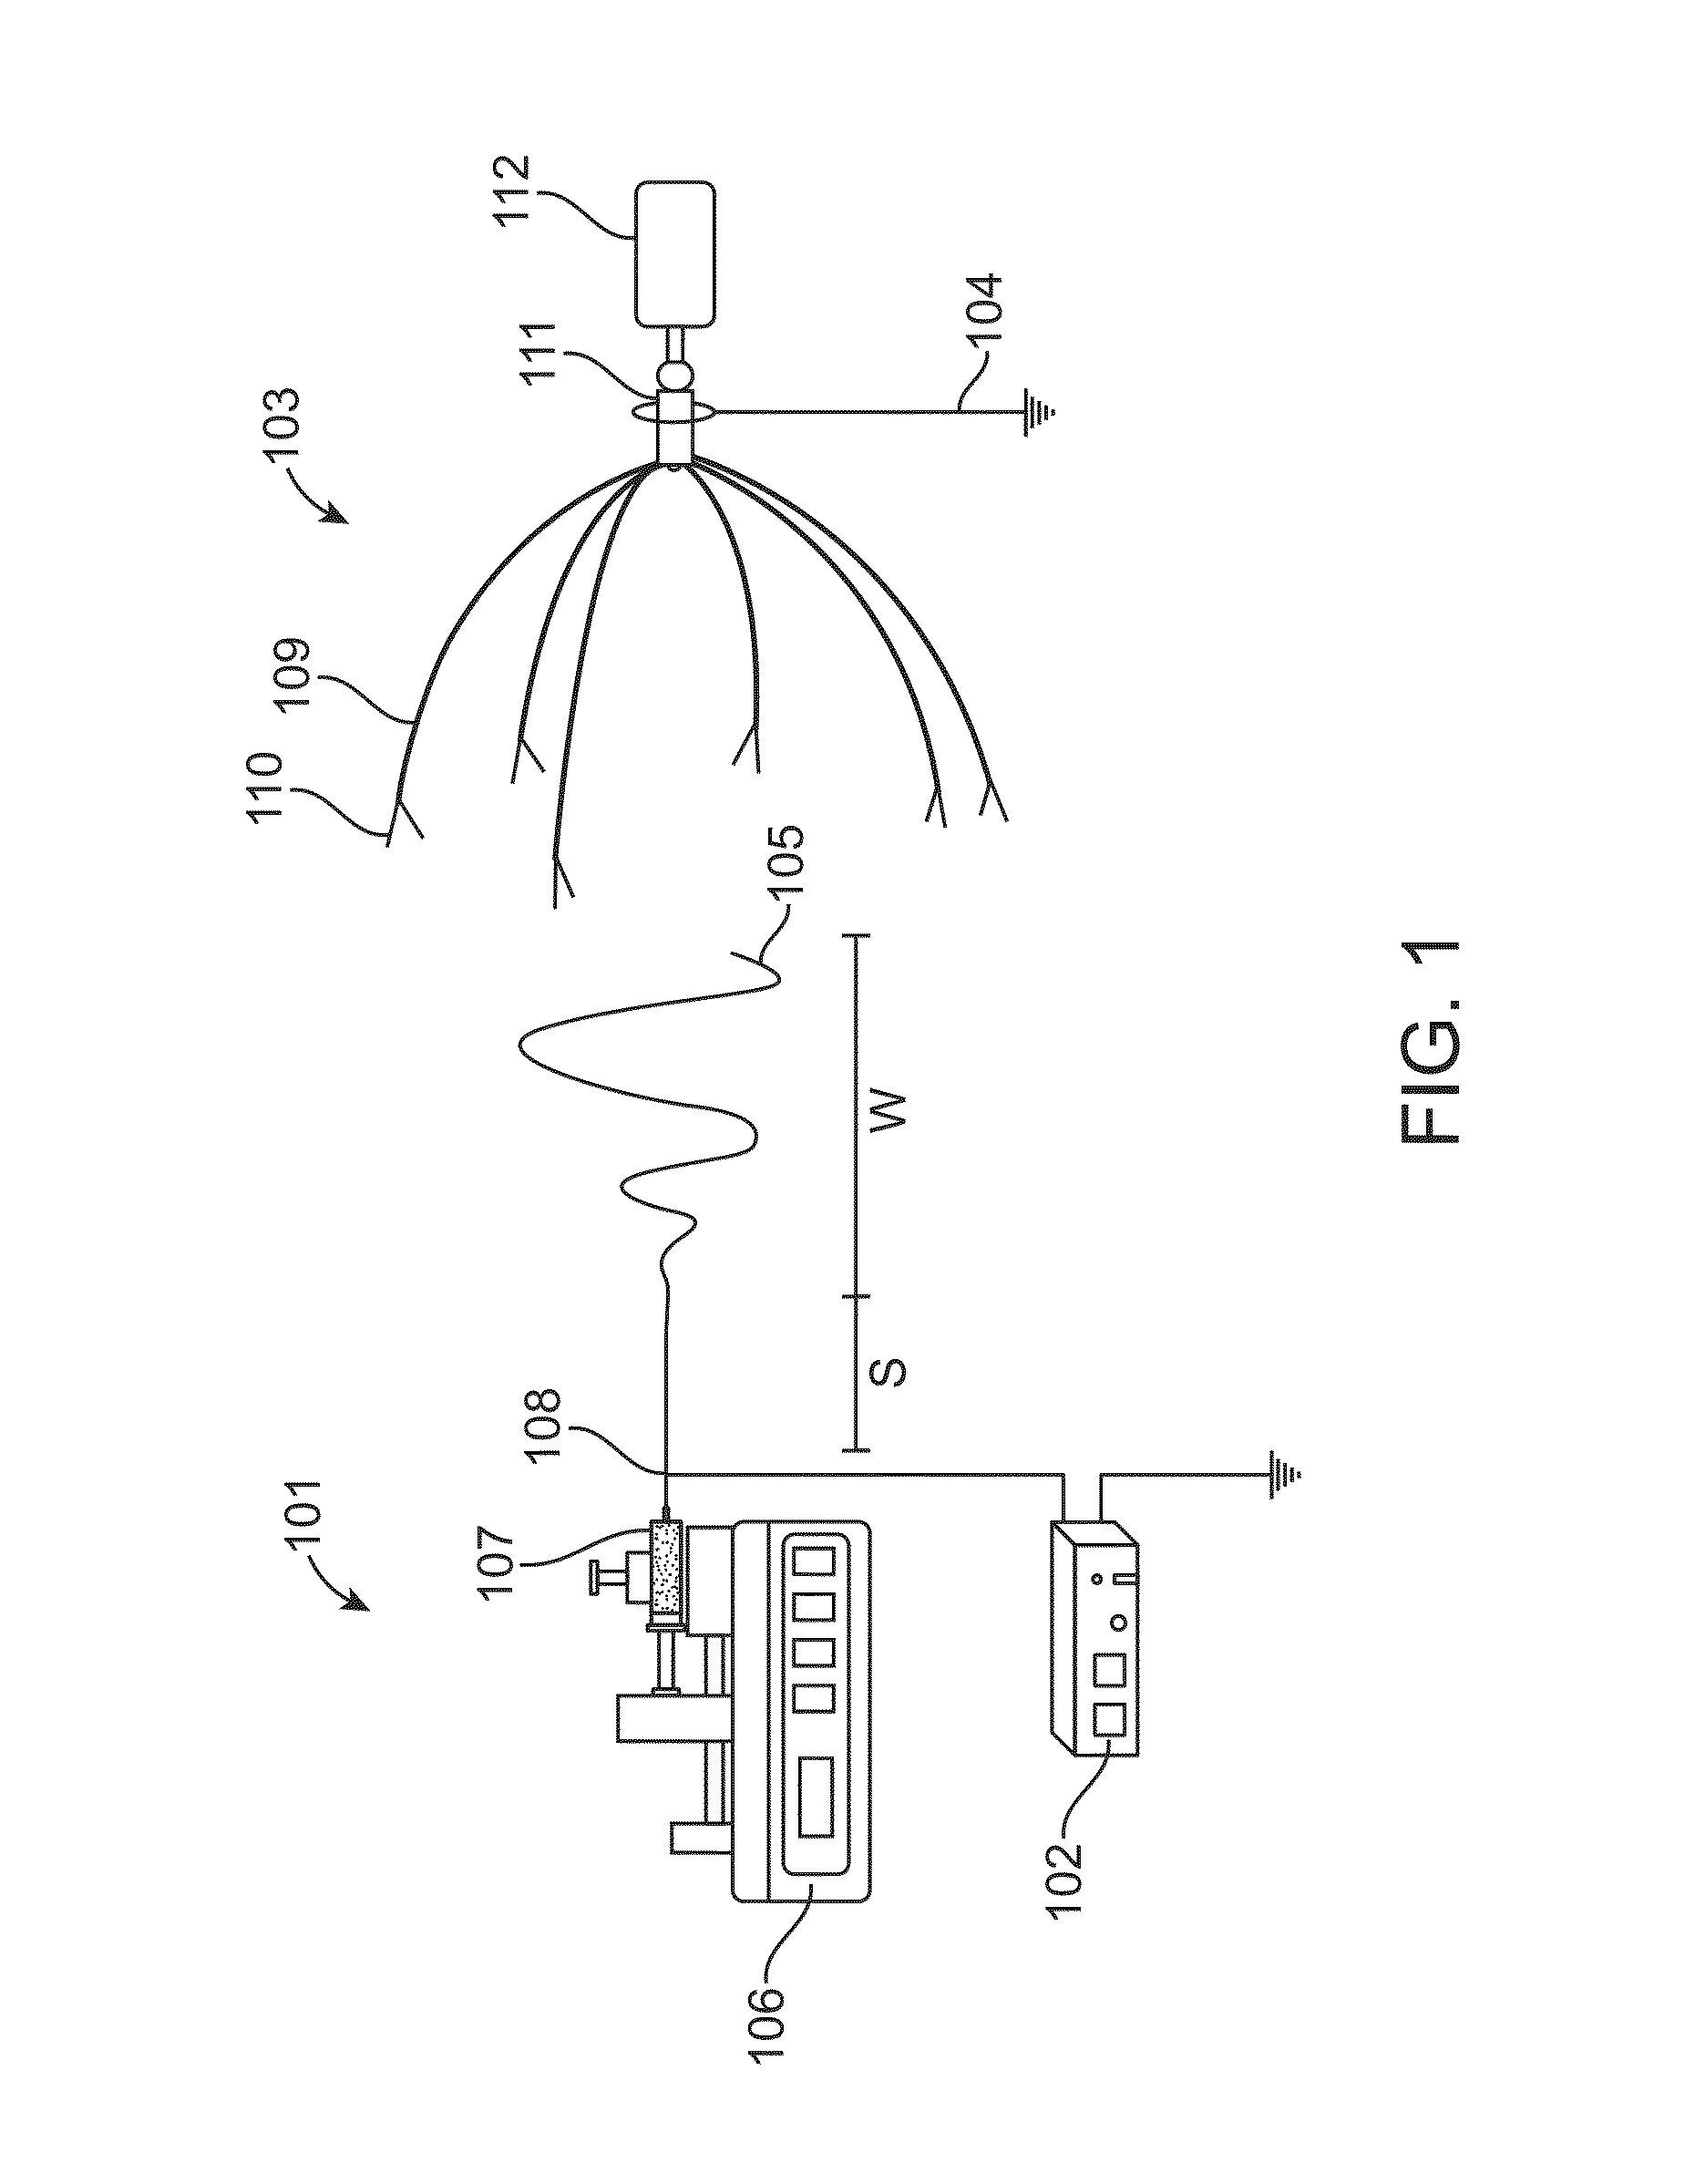 Electrospinning apparatus and method for producing multi-dimensional structures and core-sheath yarns